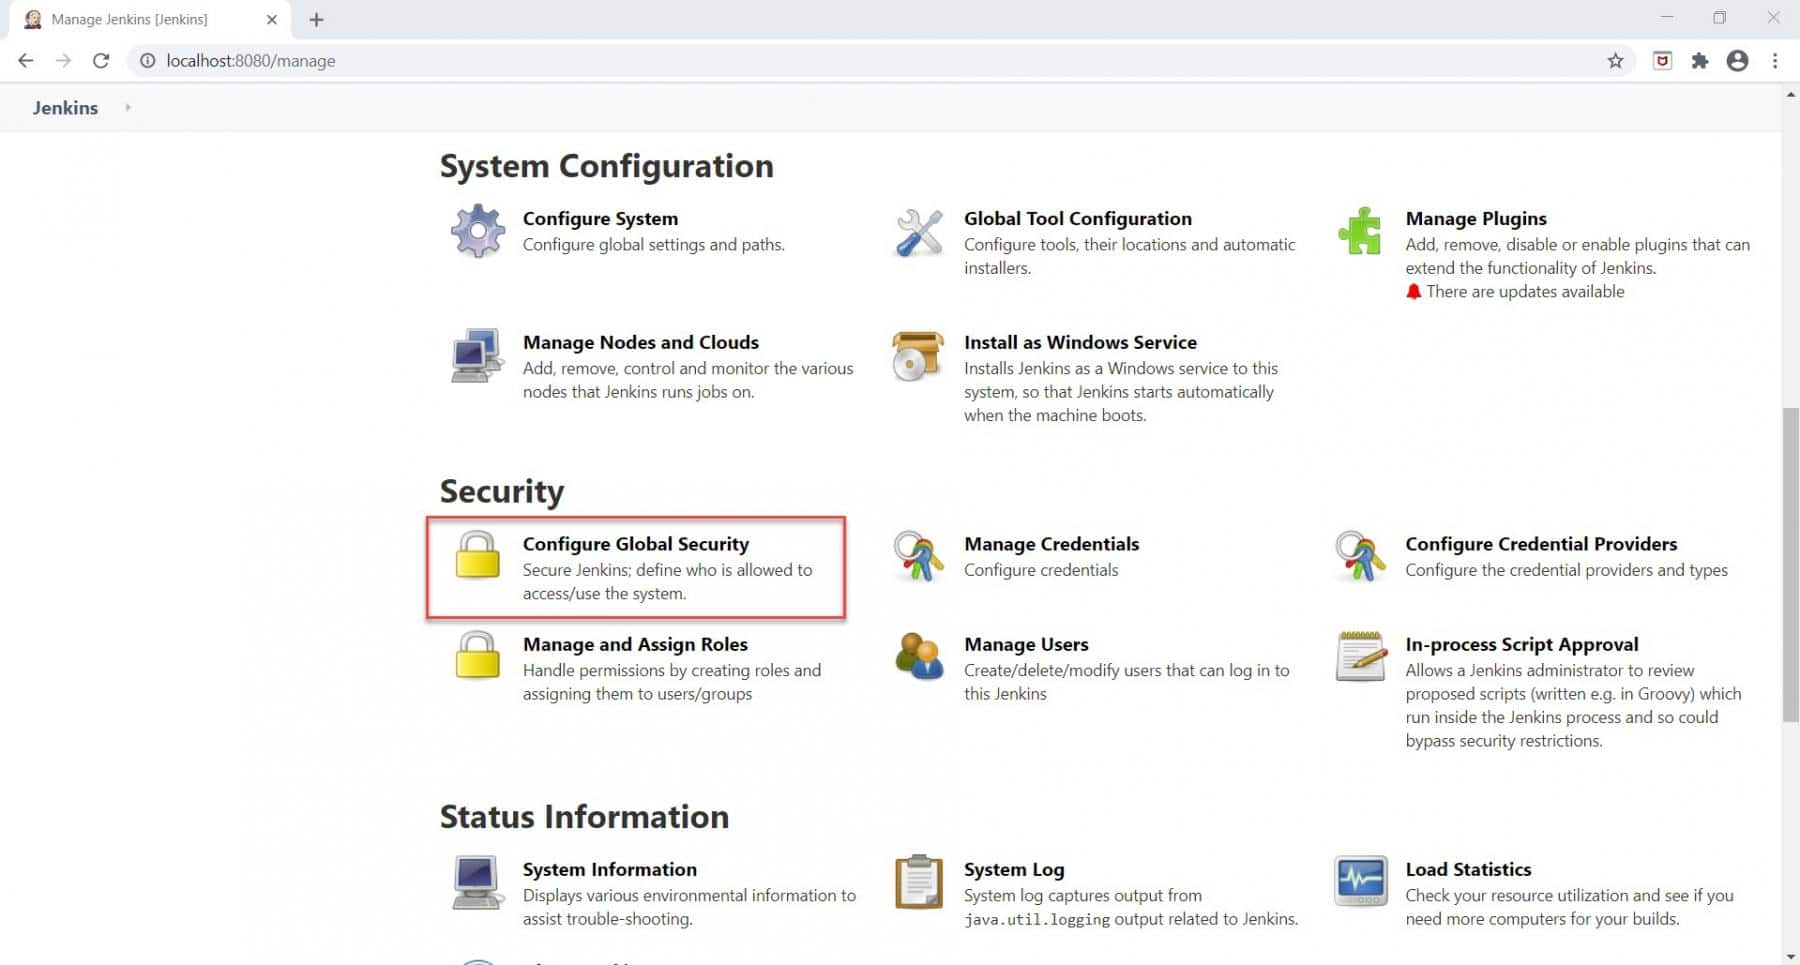 Jenkins User Management - Configure Global Security section